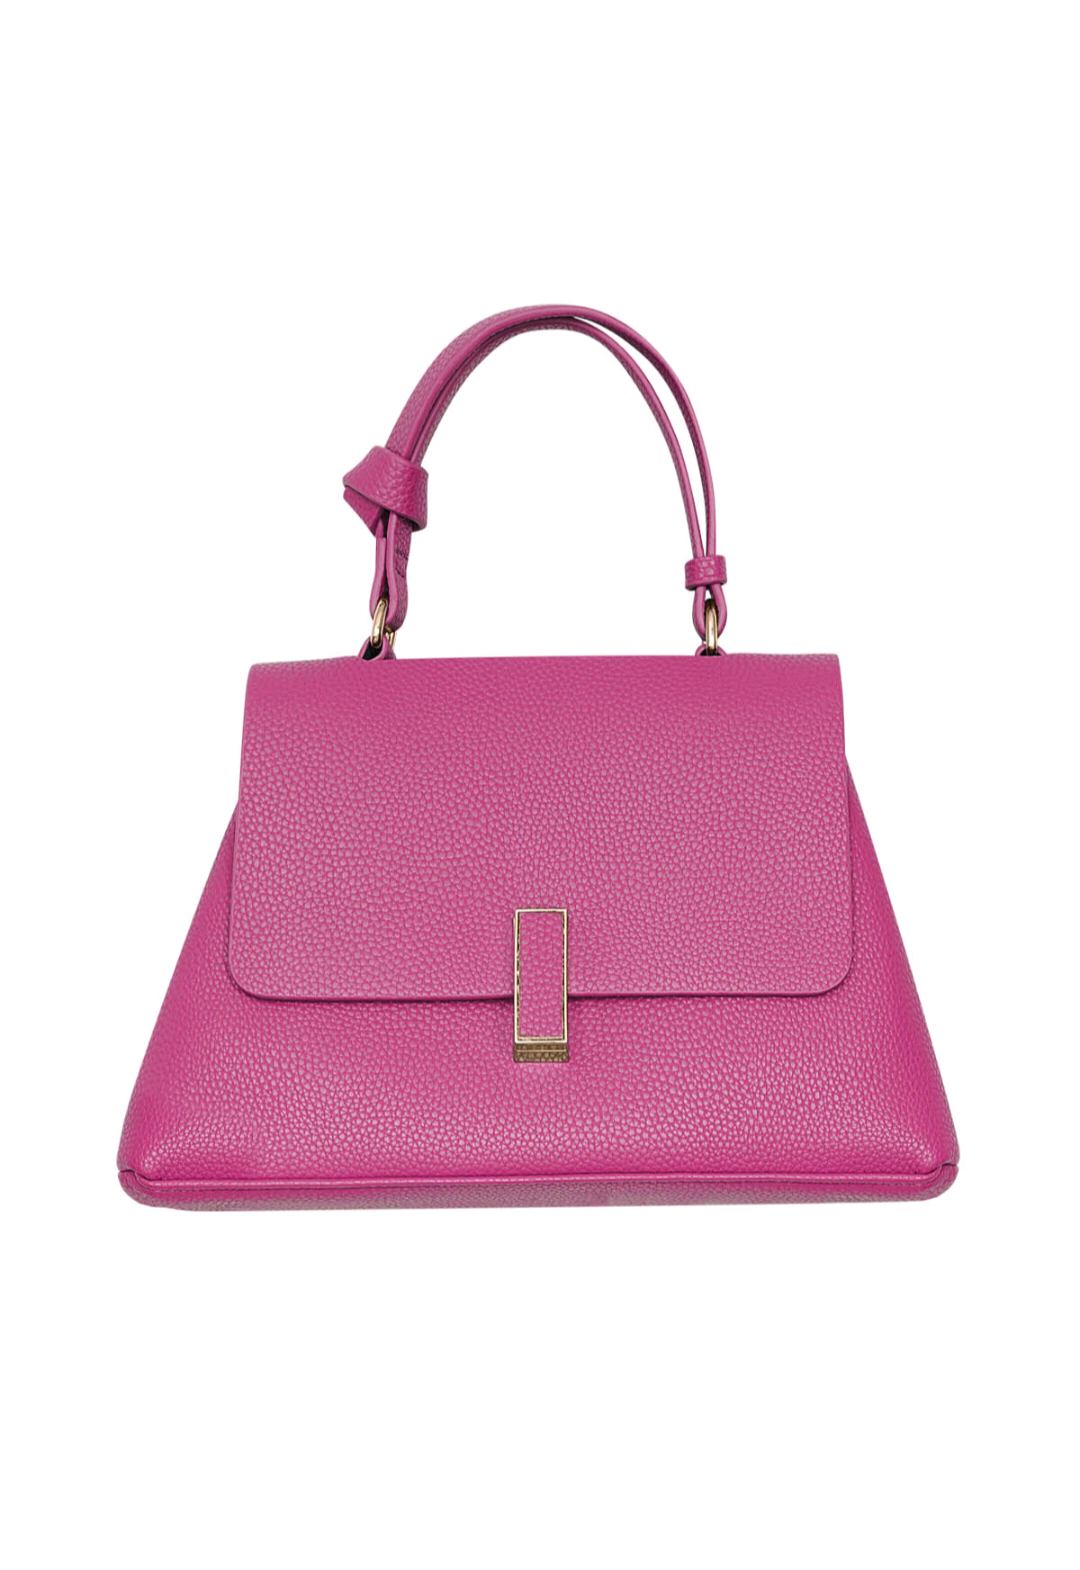 Handtasche Musthave - Rosa PU